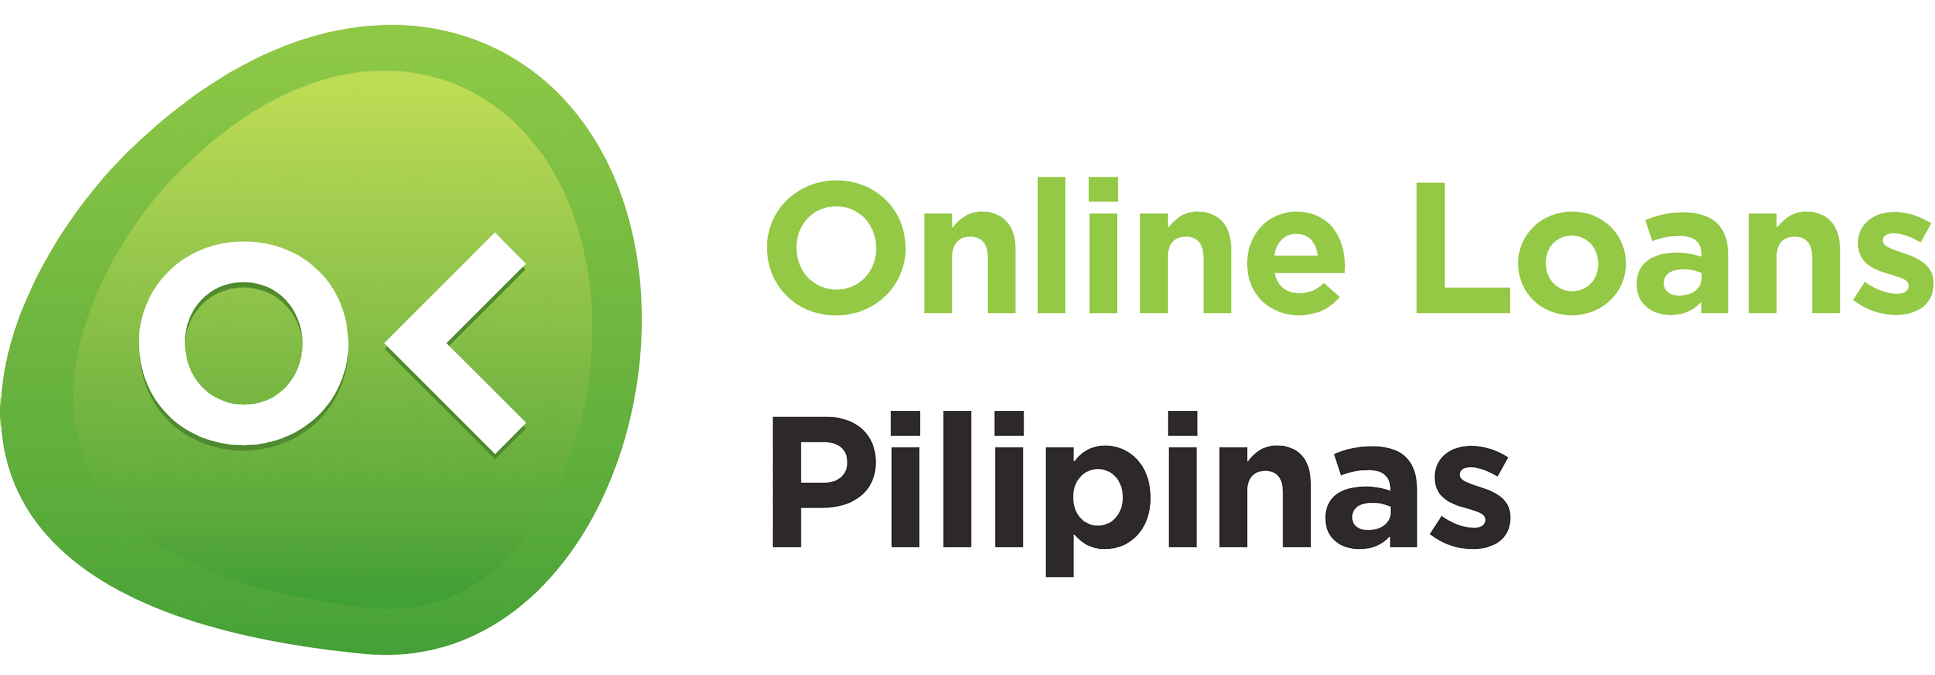 Online loans Pilipinas: reviews, loan application and terms | Maanimo.ph